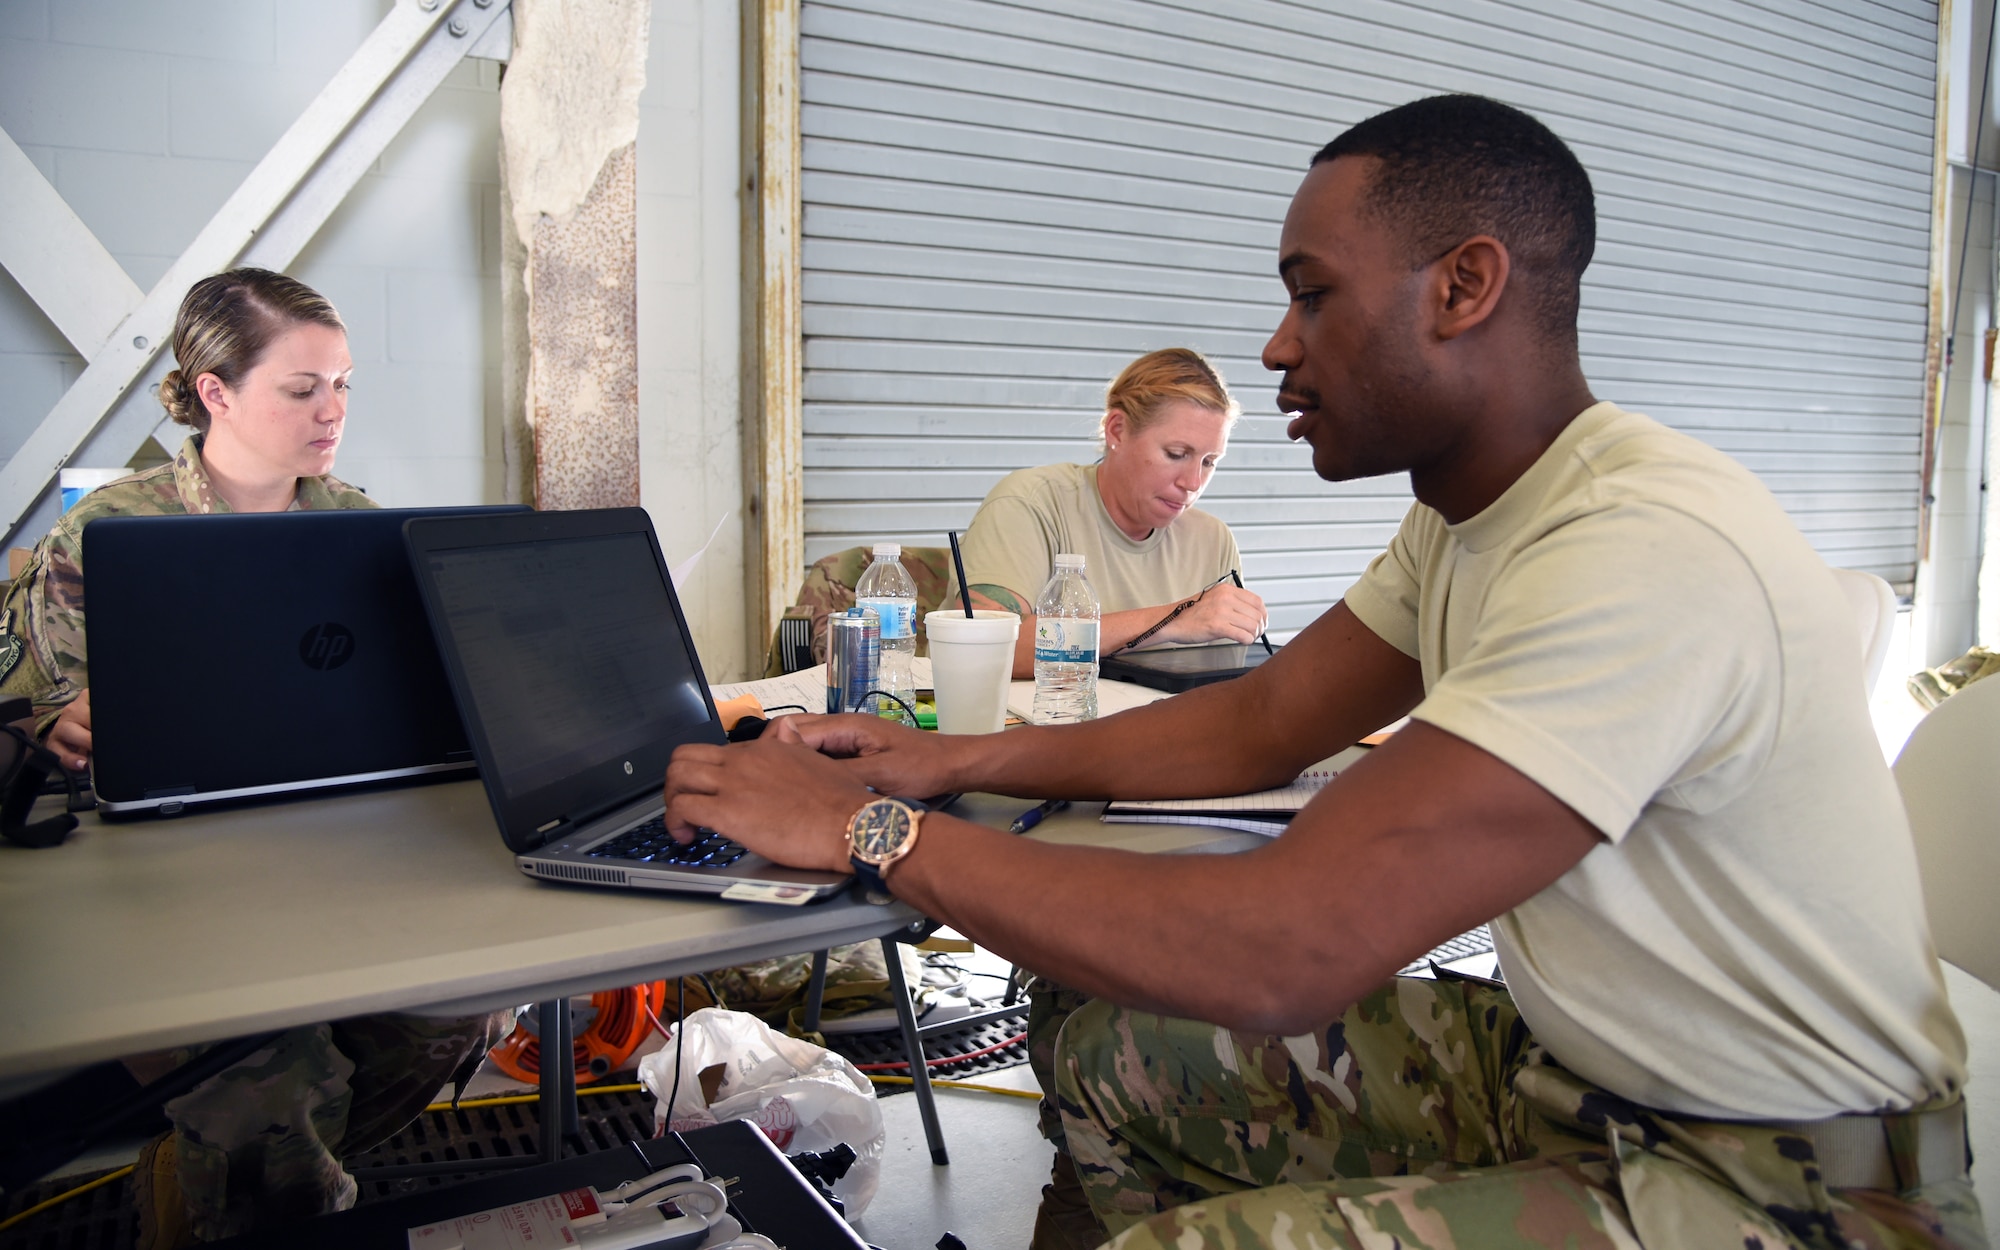 Tech. Sgt. Damon Jones (Jacksonville, Florida), SrA. Alexandra Dubois (Melbourne, Florida) and Master Sgt. Michelle St. Laurent (Melbourne, Florida) track flight times and personnel documents for the 334th Air Expeditionary Group inside the staging hangar at Joint Base Charleston, S.C., Sept. 16, 2018 in support of Hurricane Florence Relief Operations. All three Airmen are forward deployed from the 920th Rescue Wing, at Patrick Air Force Base, Florida. (U.S. Air Force photo/Tech. Sgt. Kelly Goonan)